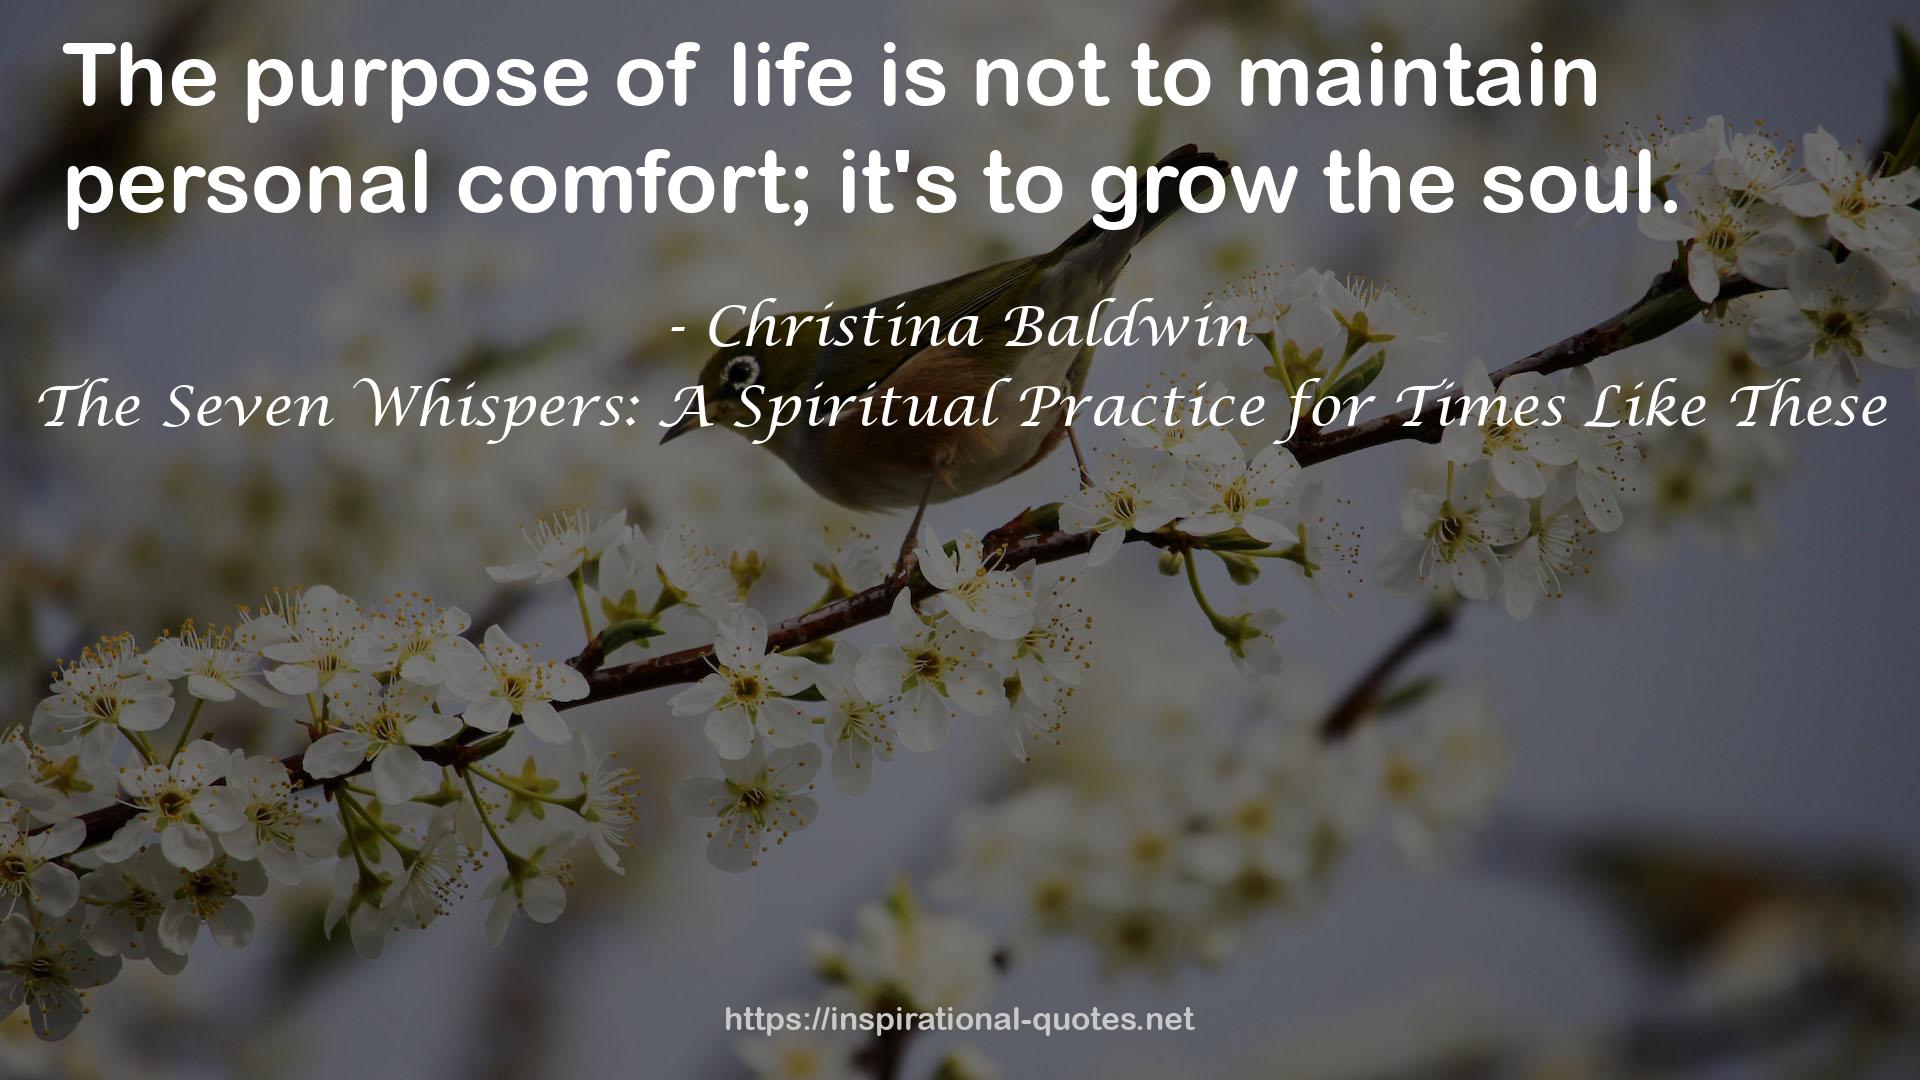 The Seven Whispers: A Spiritual Practice for Times Like These QUOTES